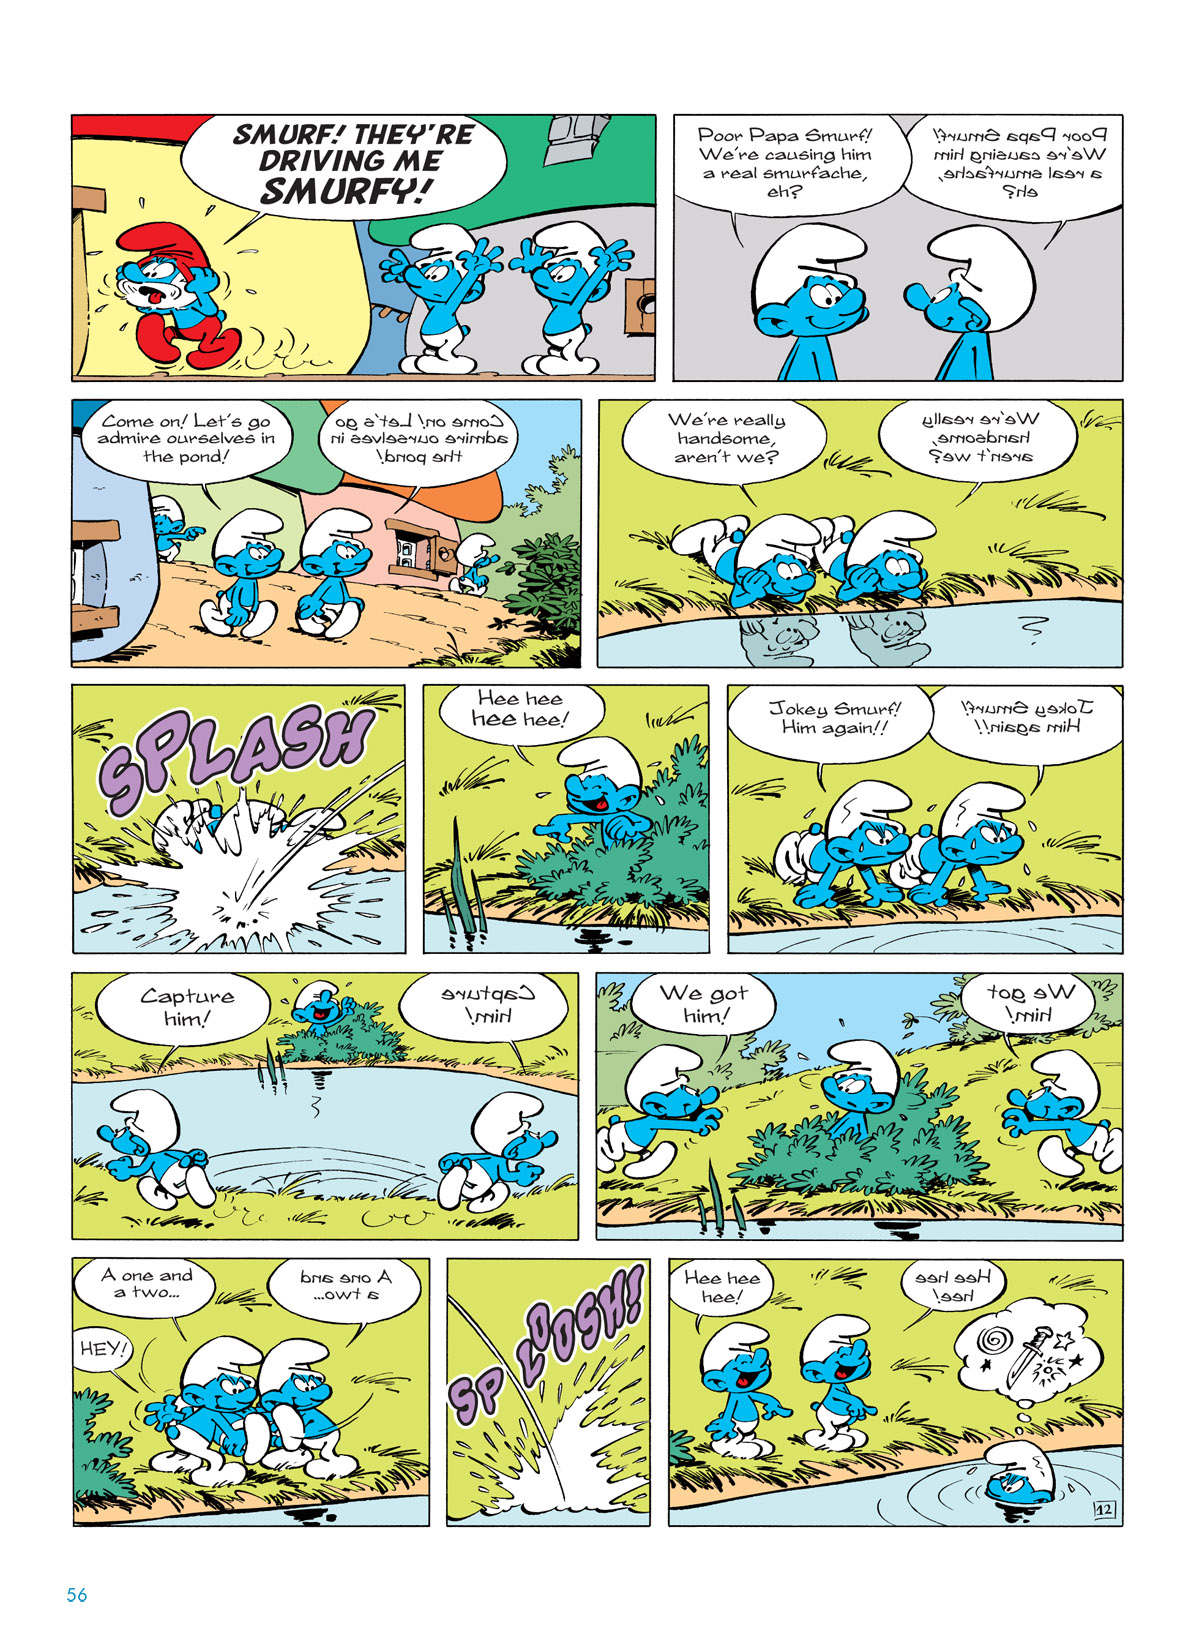 Read online The Smurfs comic -  Issue #5 - 56